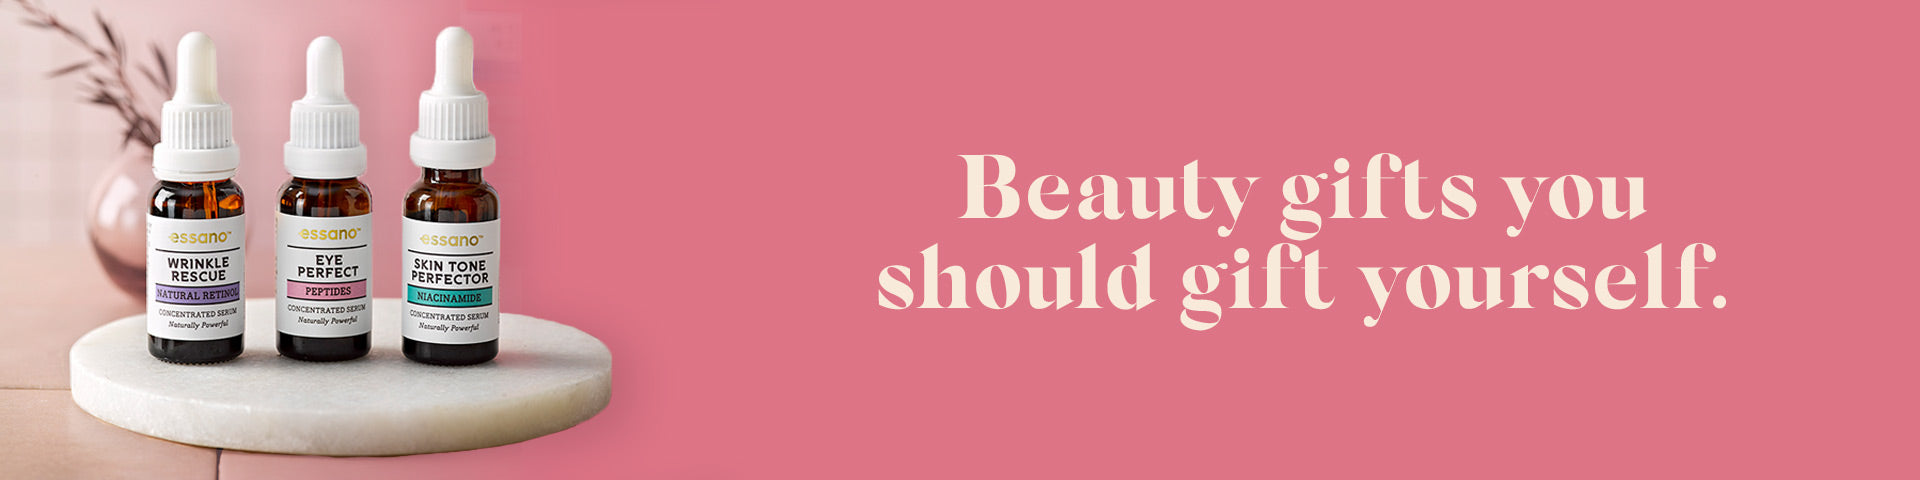 Gift Me Gorgeous: Beauty Gifts You Should Gift Yourself